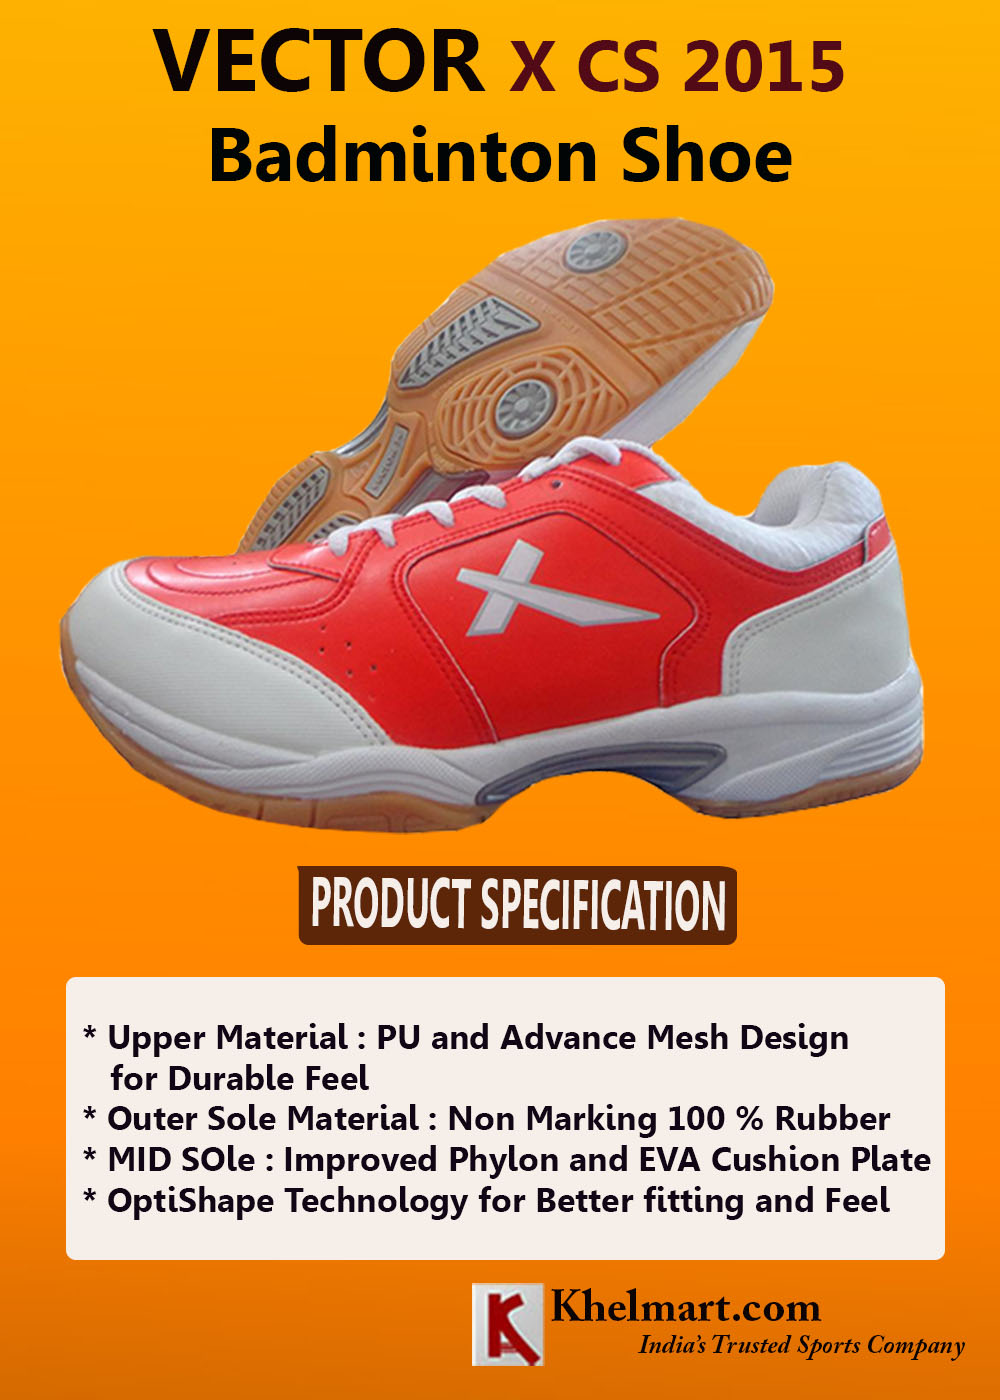 Best Badminton Shoes Under 2000 for Intermediate Players